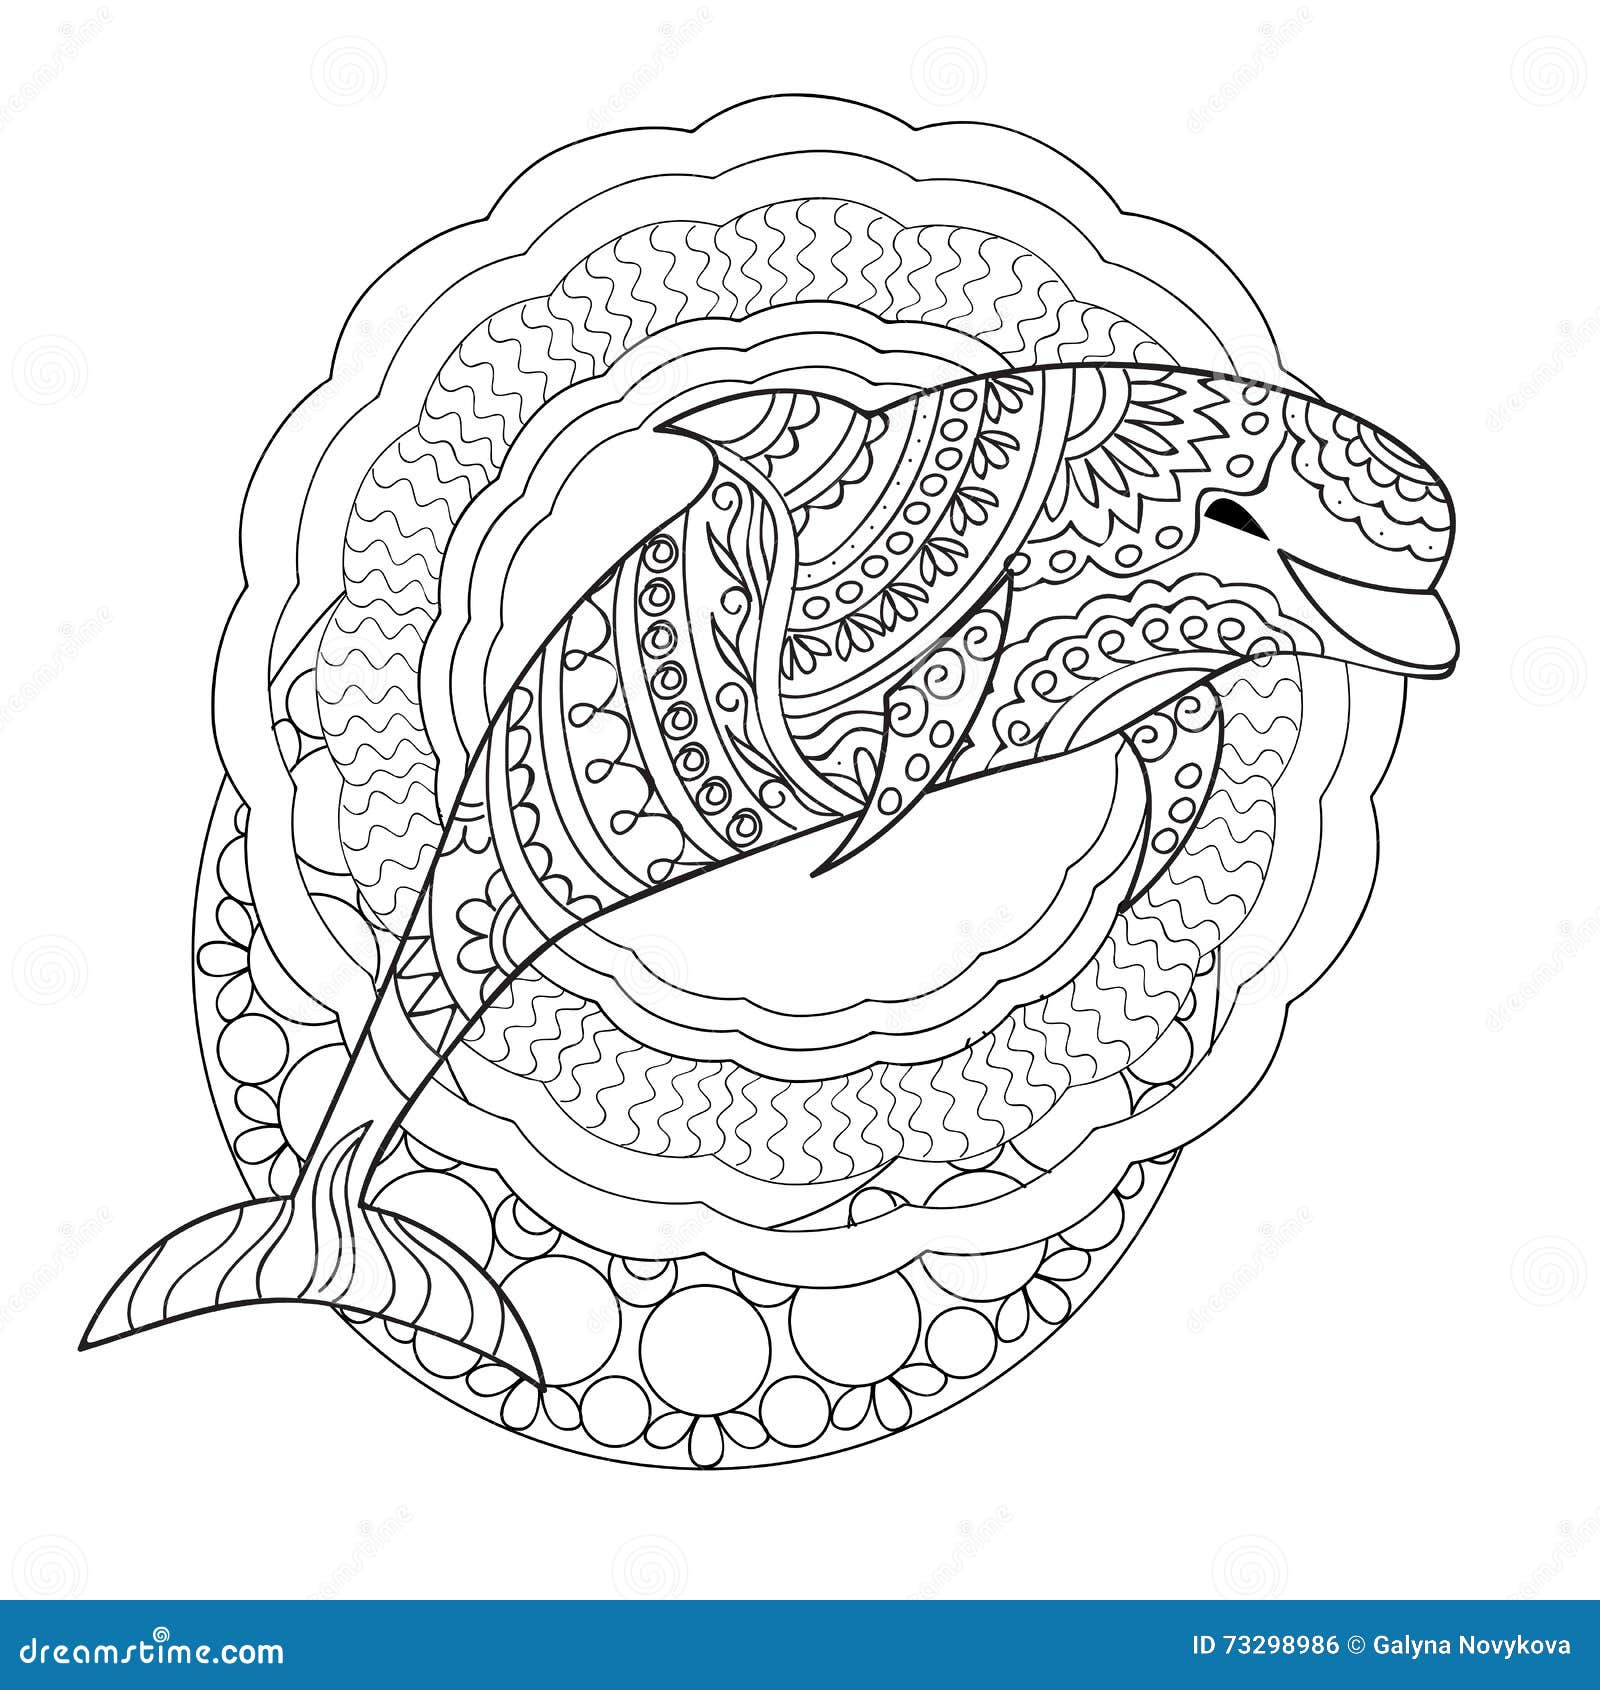 36+ ganja white night coloring book Avengers coloring pages